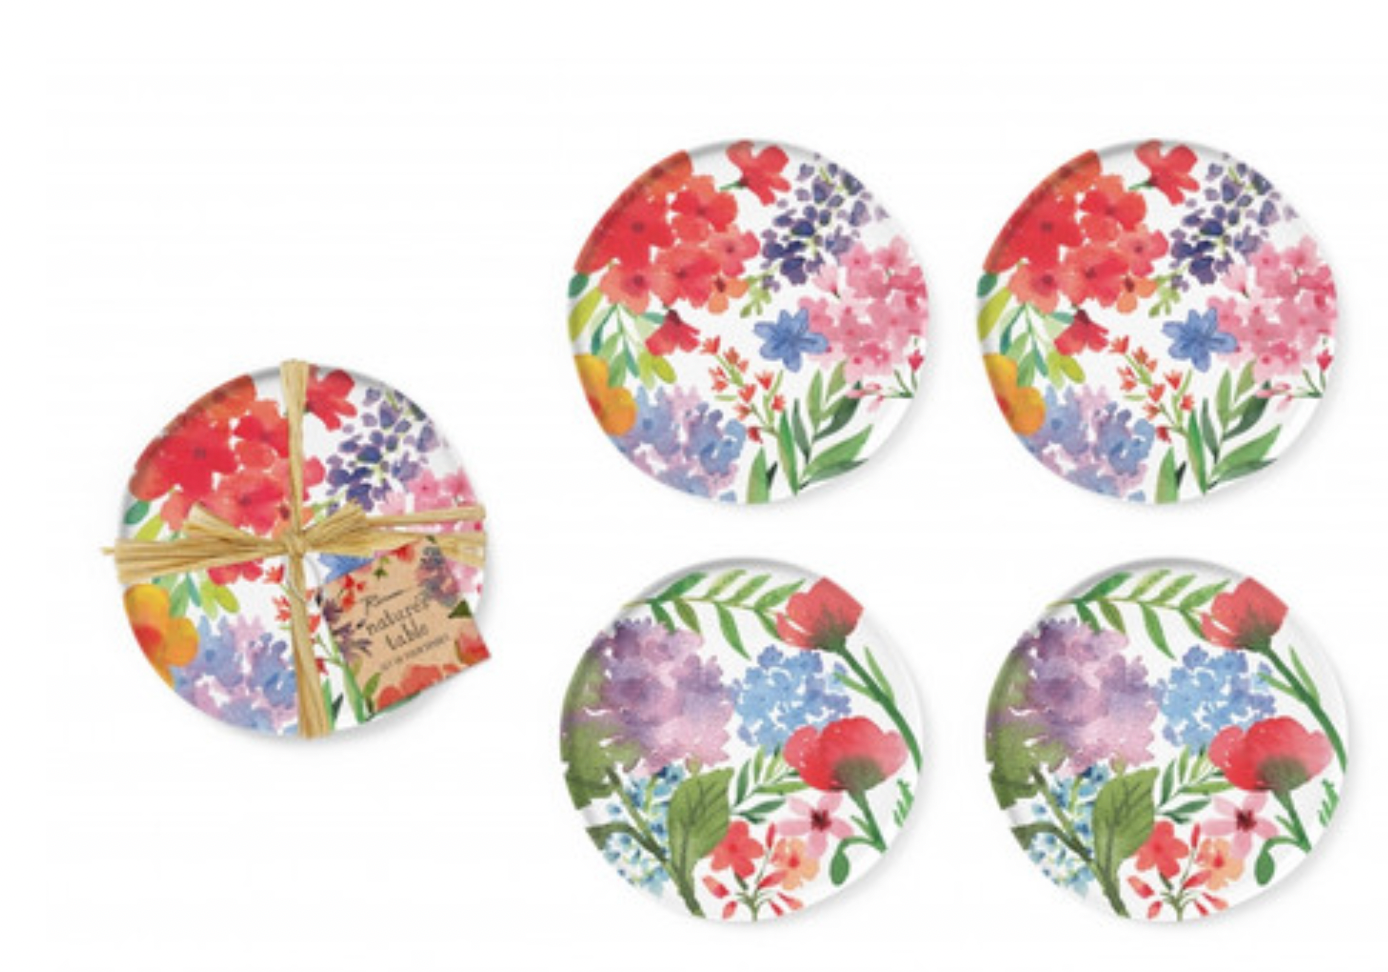 Luxe porcelain Floral Small Plates With Matching Accessories - In gift box